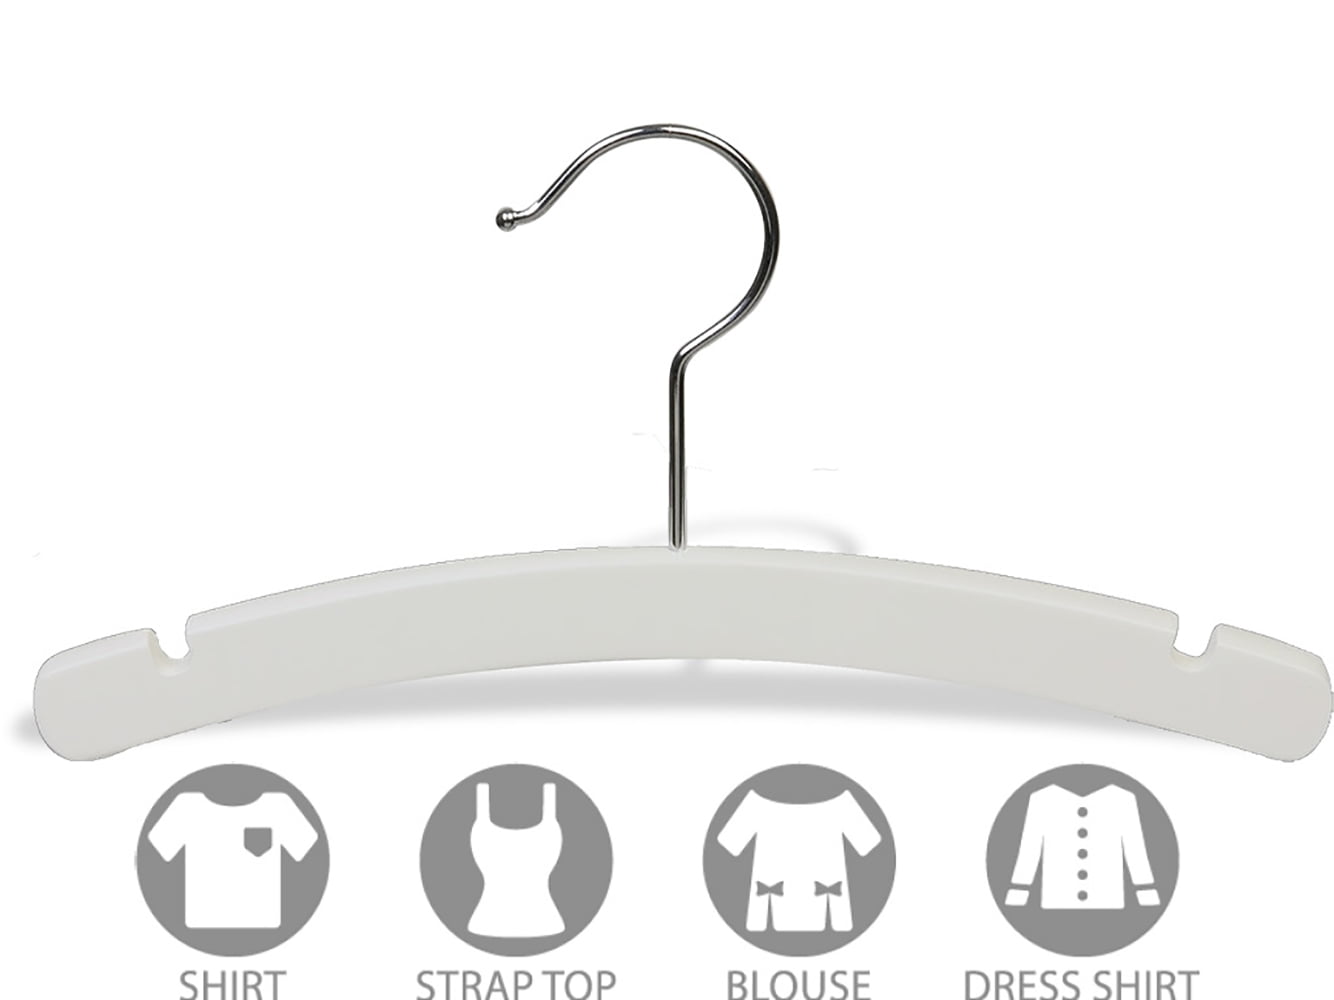 10 Baby’s Wooden Top Hanger with Chrome Hook